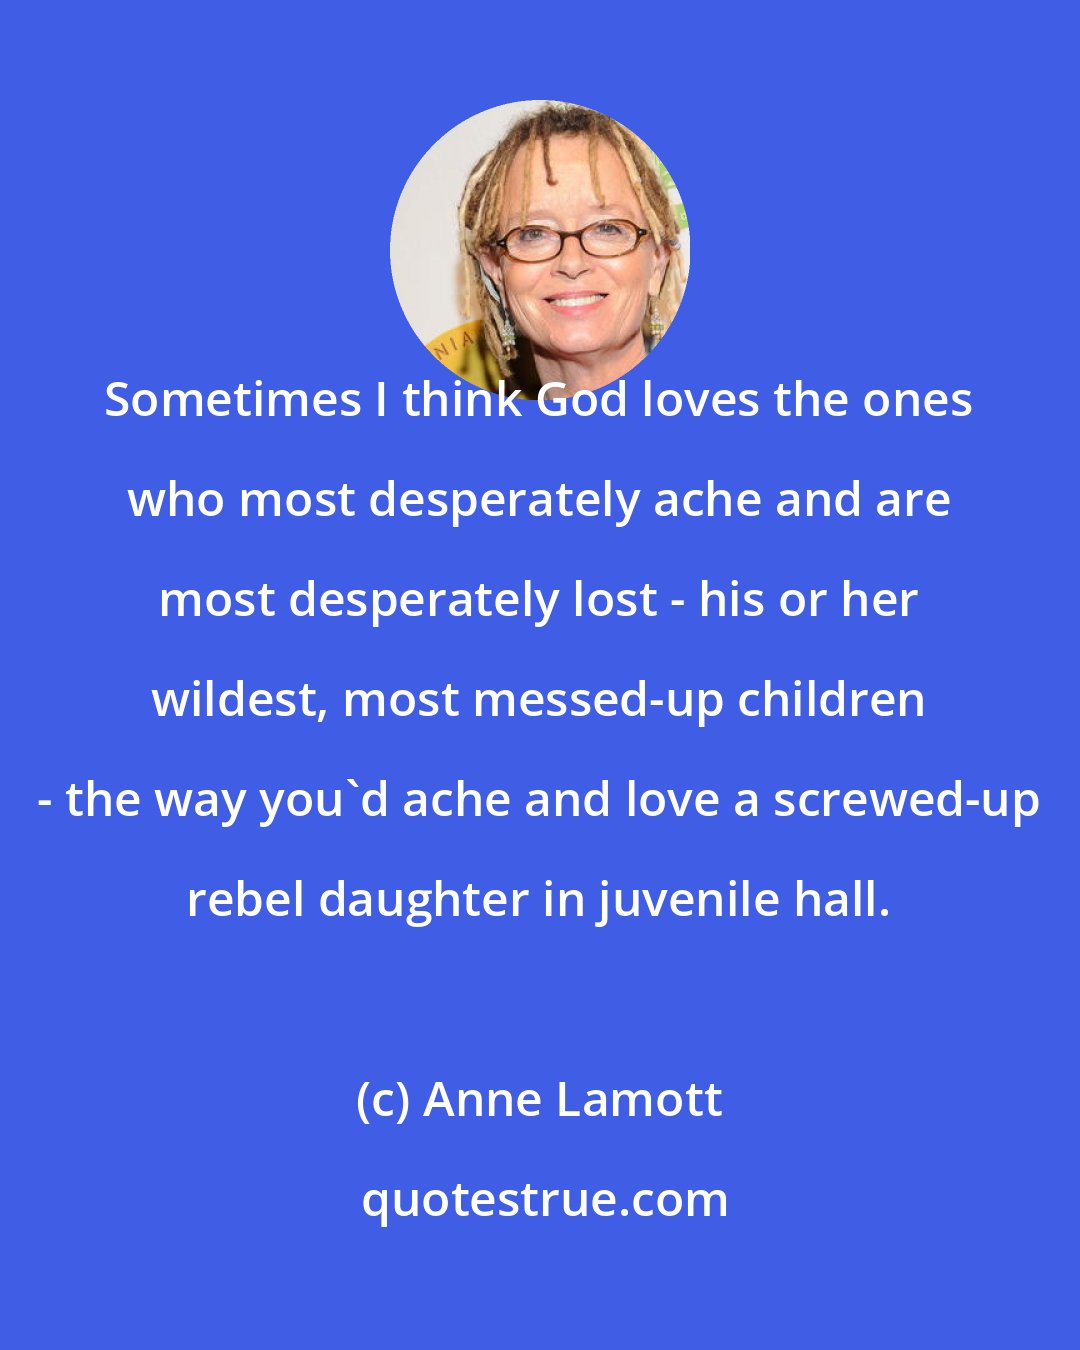 Anne Lamott: Sometimes I think God loves the ones who most desperately ache and are most desperately lost - his or her wildest, most messed-up children - the way you'd ache and love a screwed-up rebel daughter in juvenile hall.